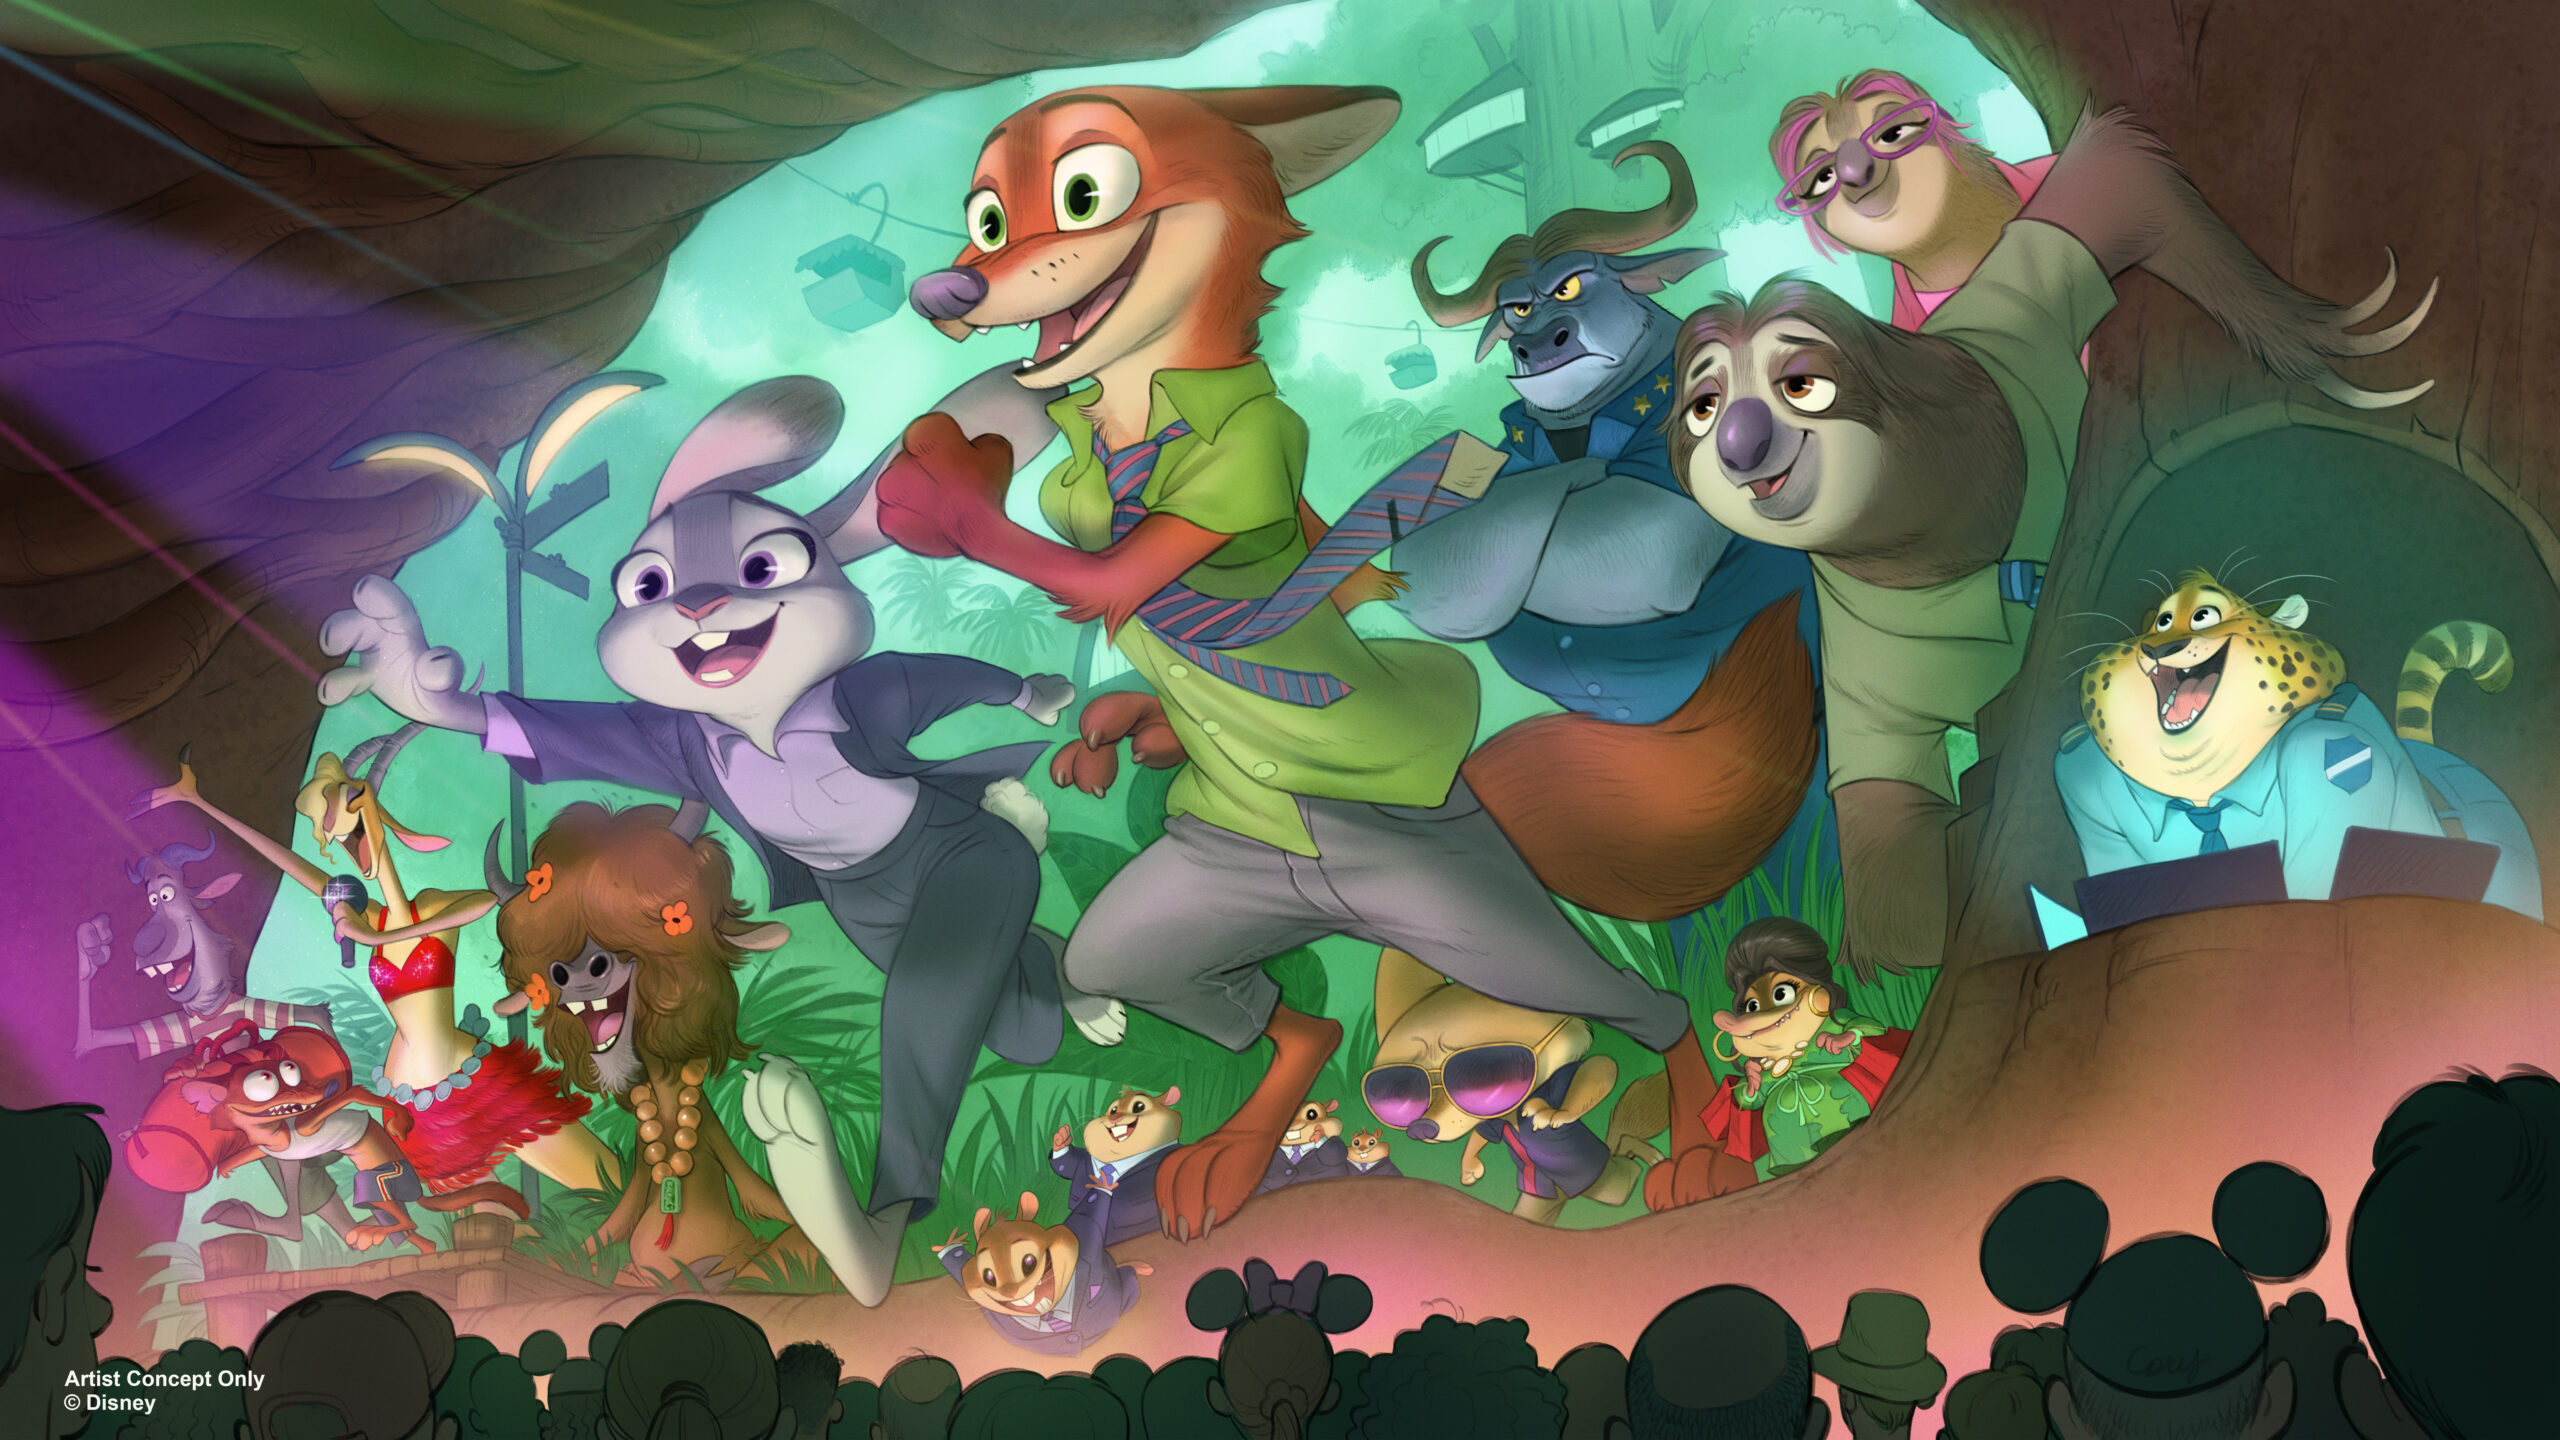 A new show based on “Zootopia” is being created for the Tree of Life theater at Disney’s Animal Kingdom! The current concept for the new “Zootopia” experience has guests visiting the different biomes you only glimpse in the film, traveling along with Judy Hopps, Nick Wilde and other characters.